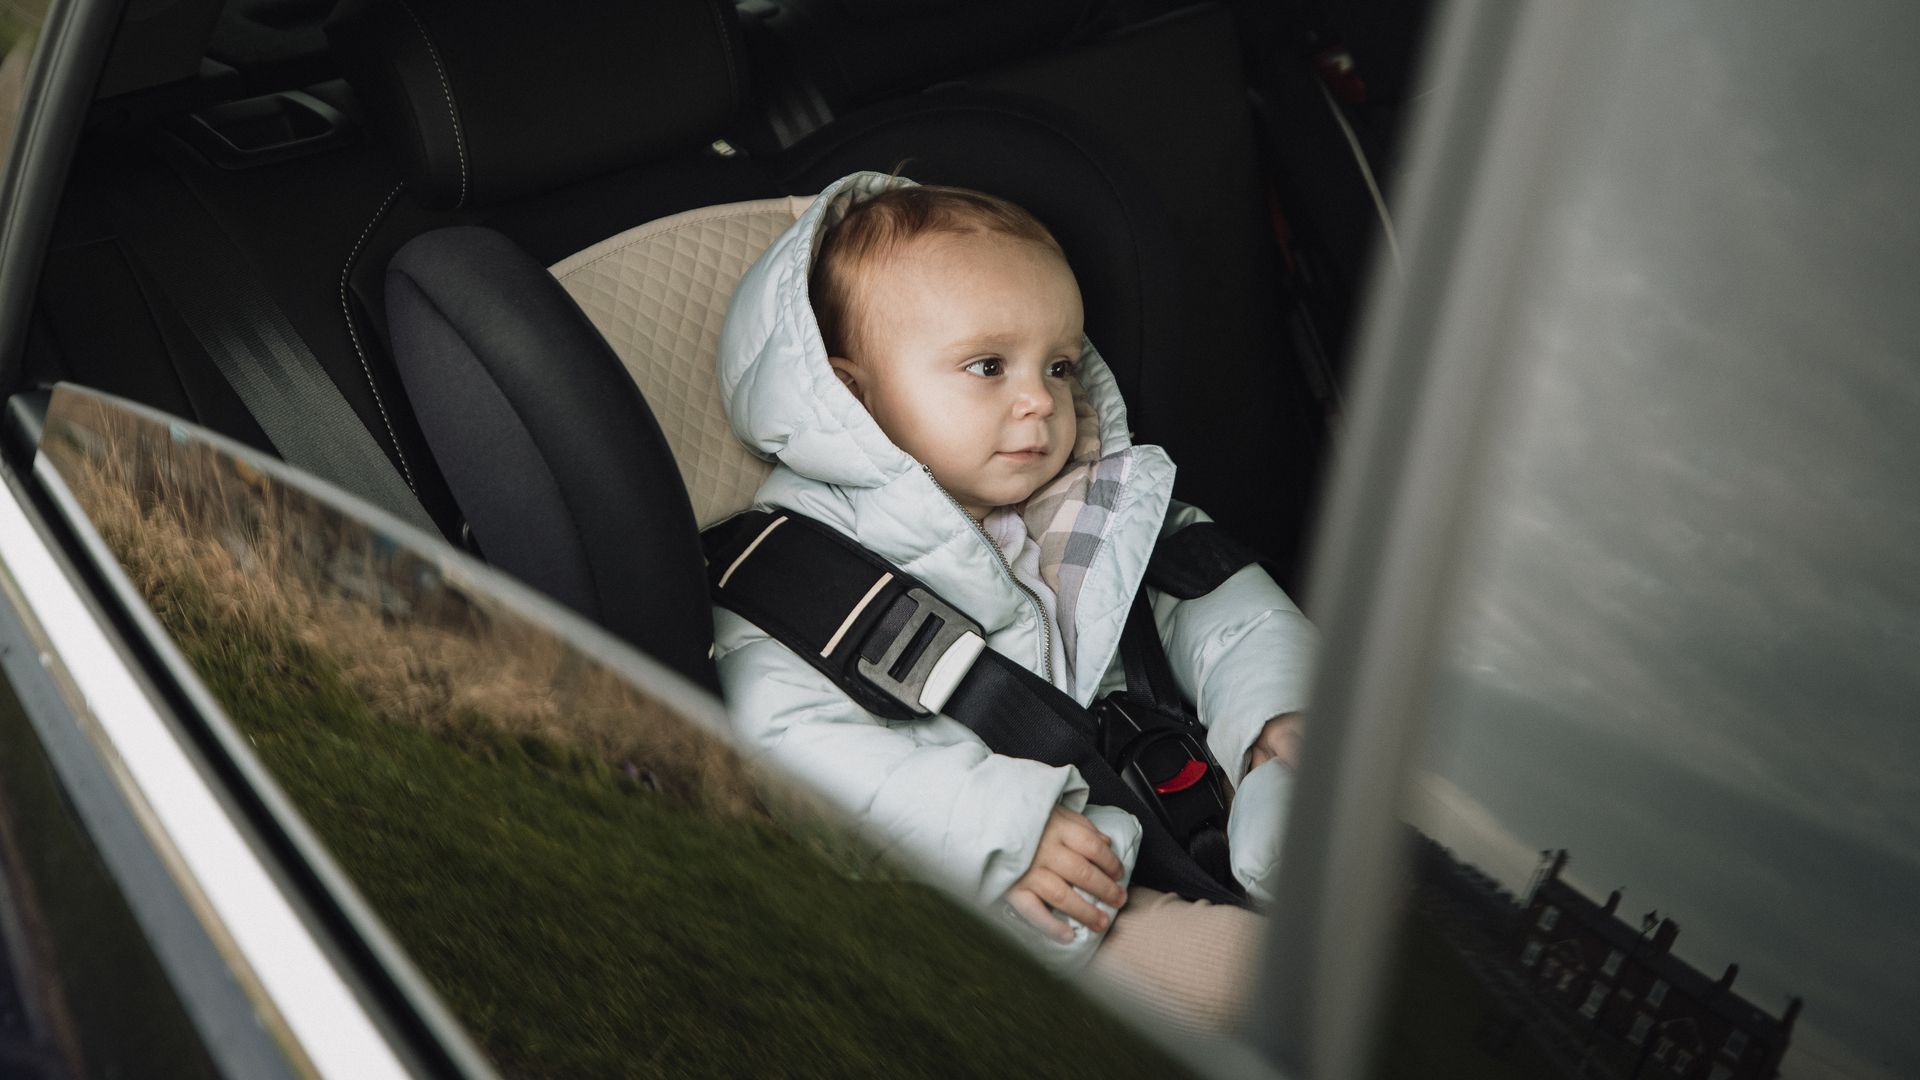 A baby in a carseat.